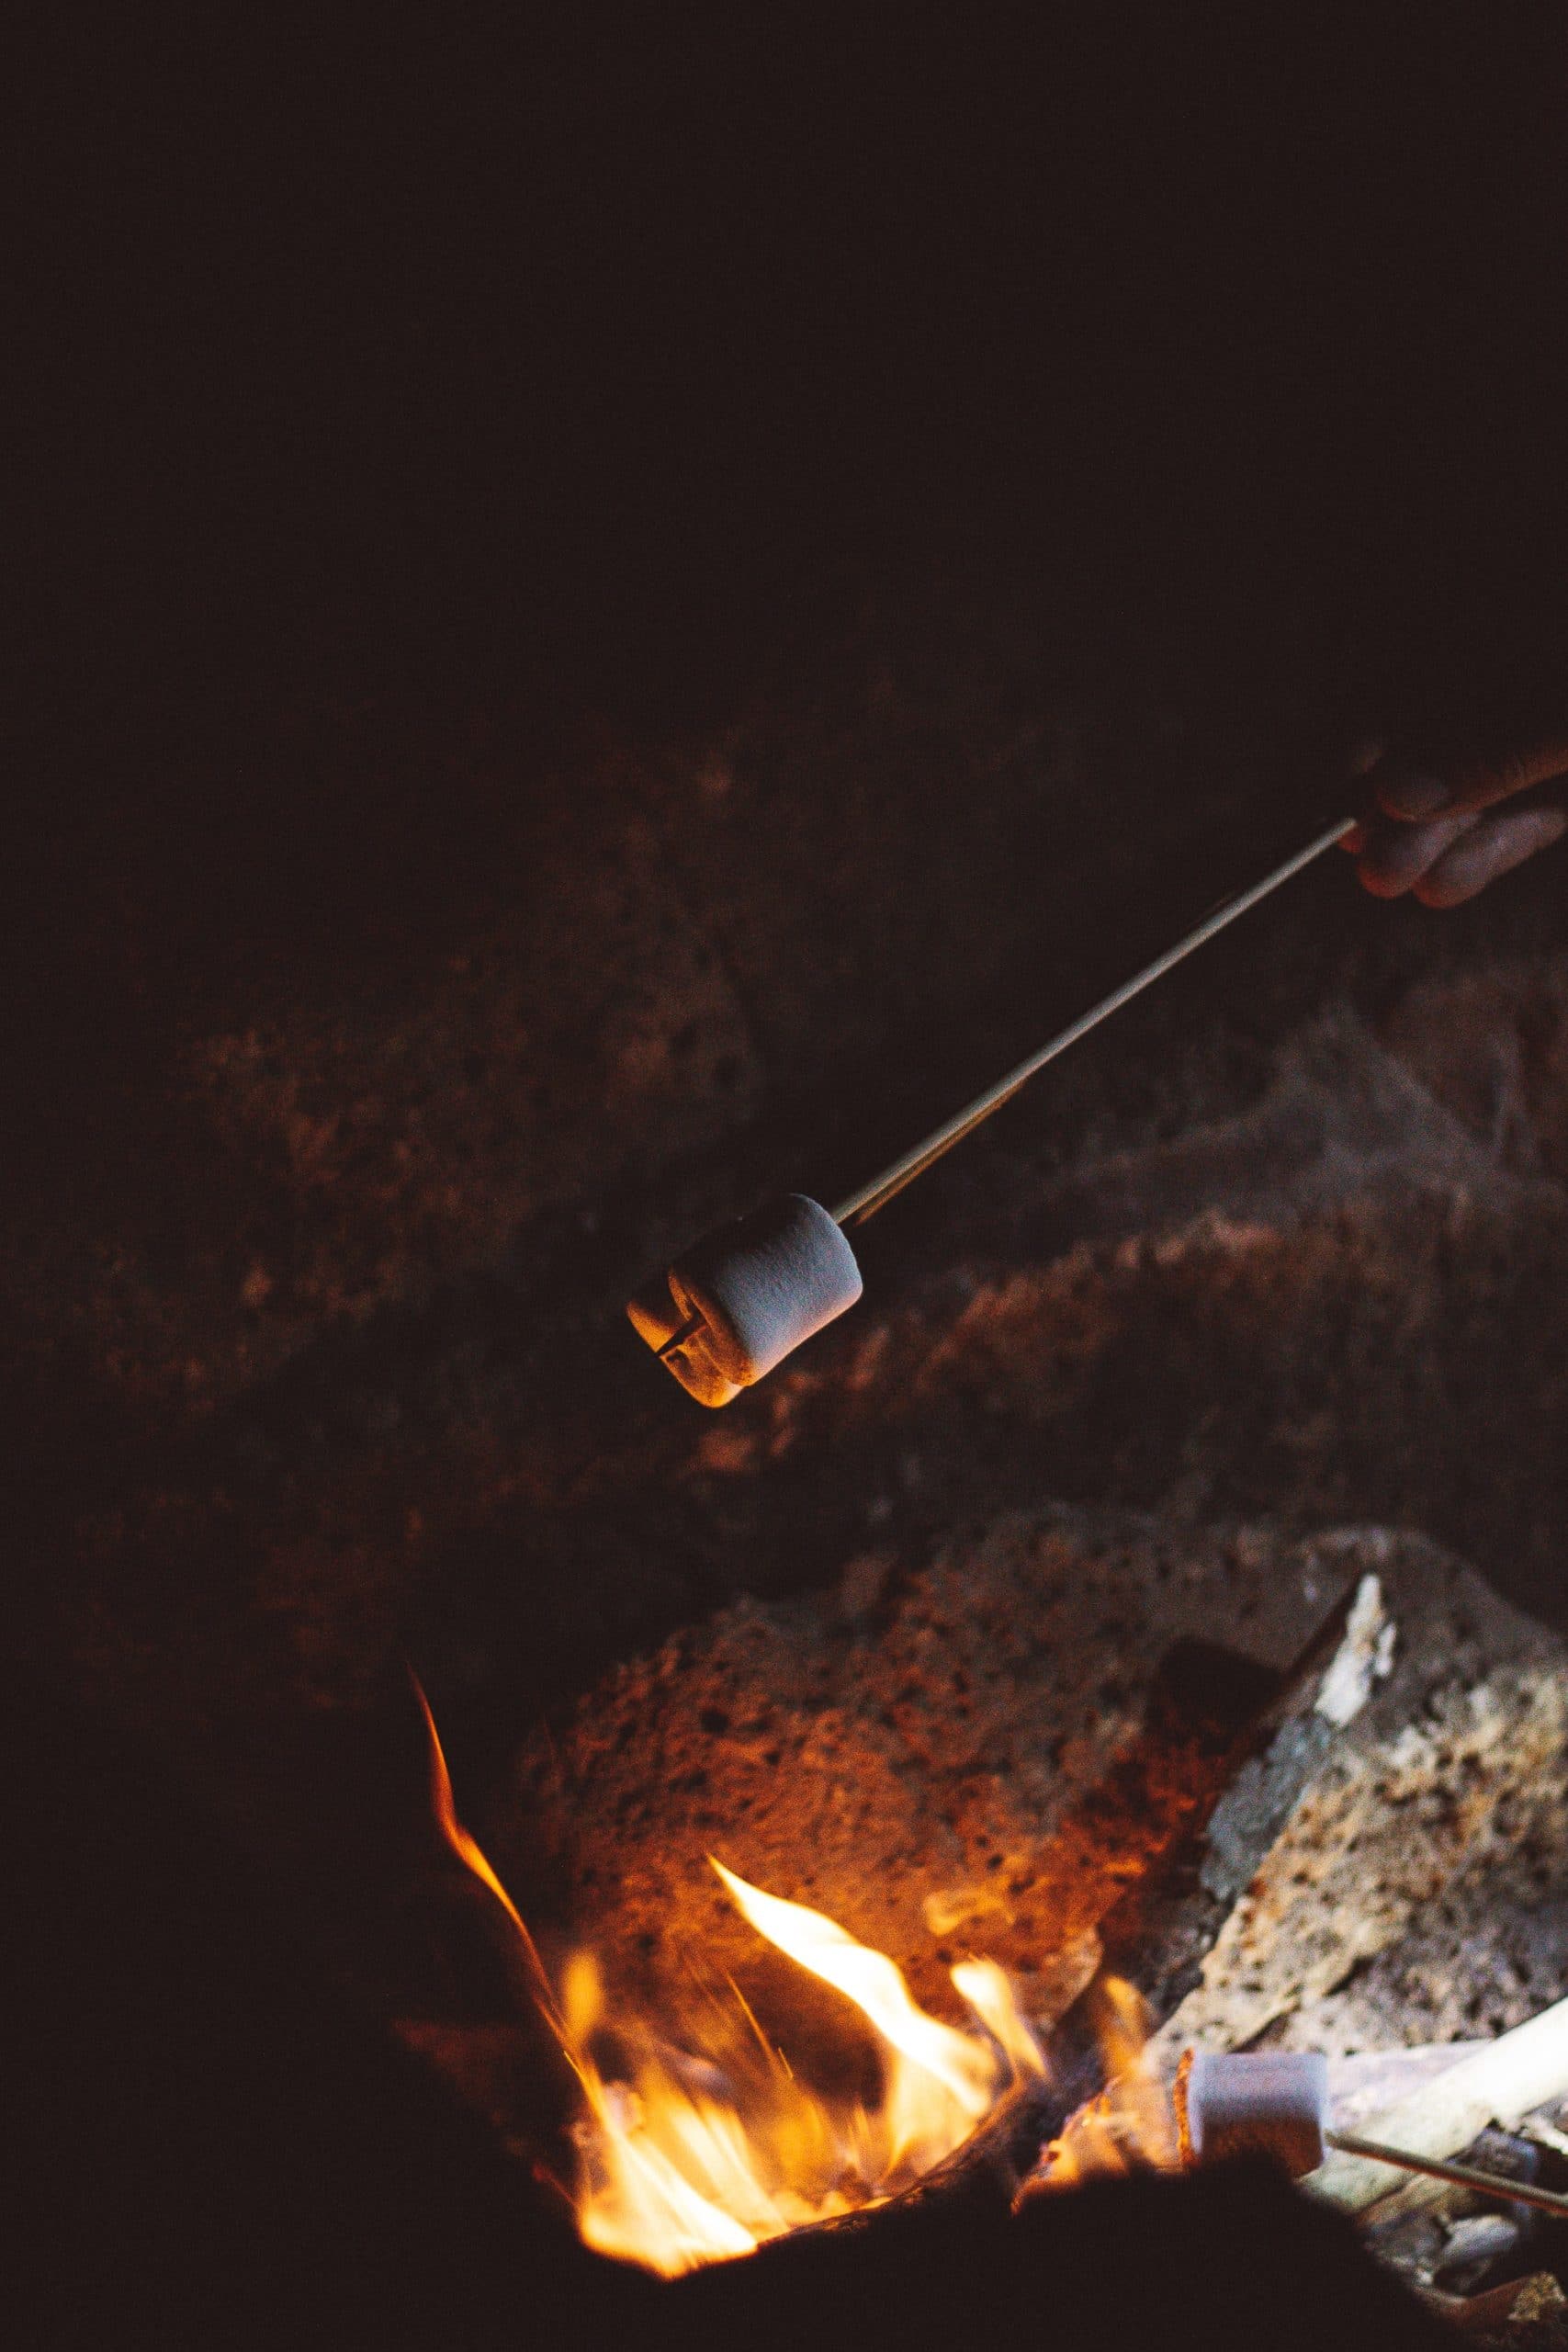 orange flames of bonfire with white half roasted marshmallow on stick over fire